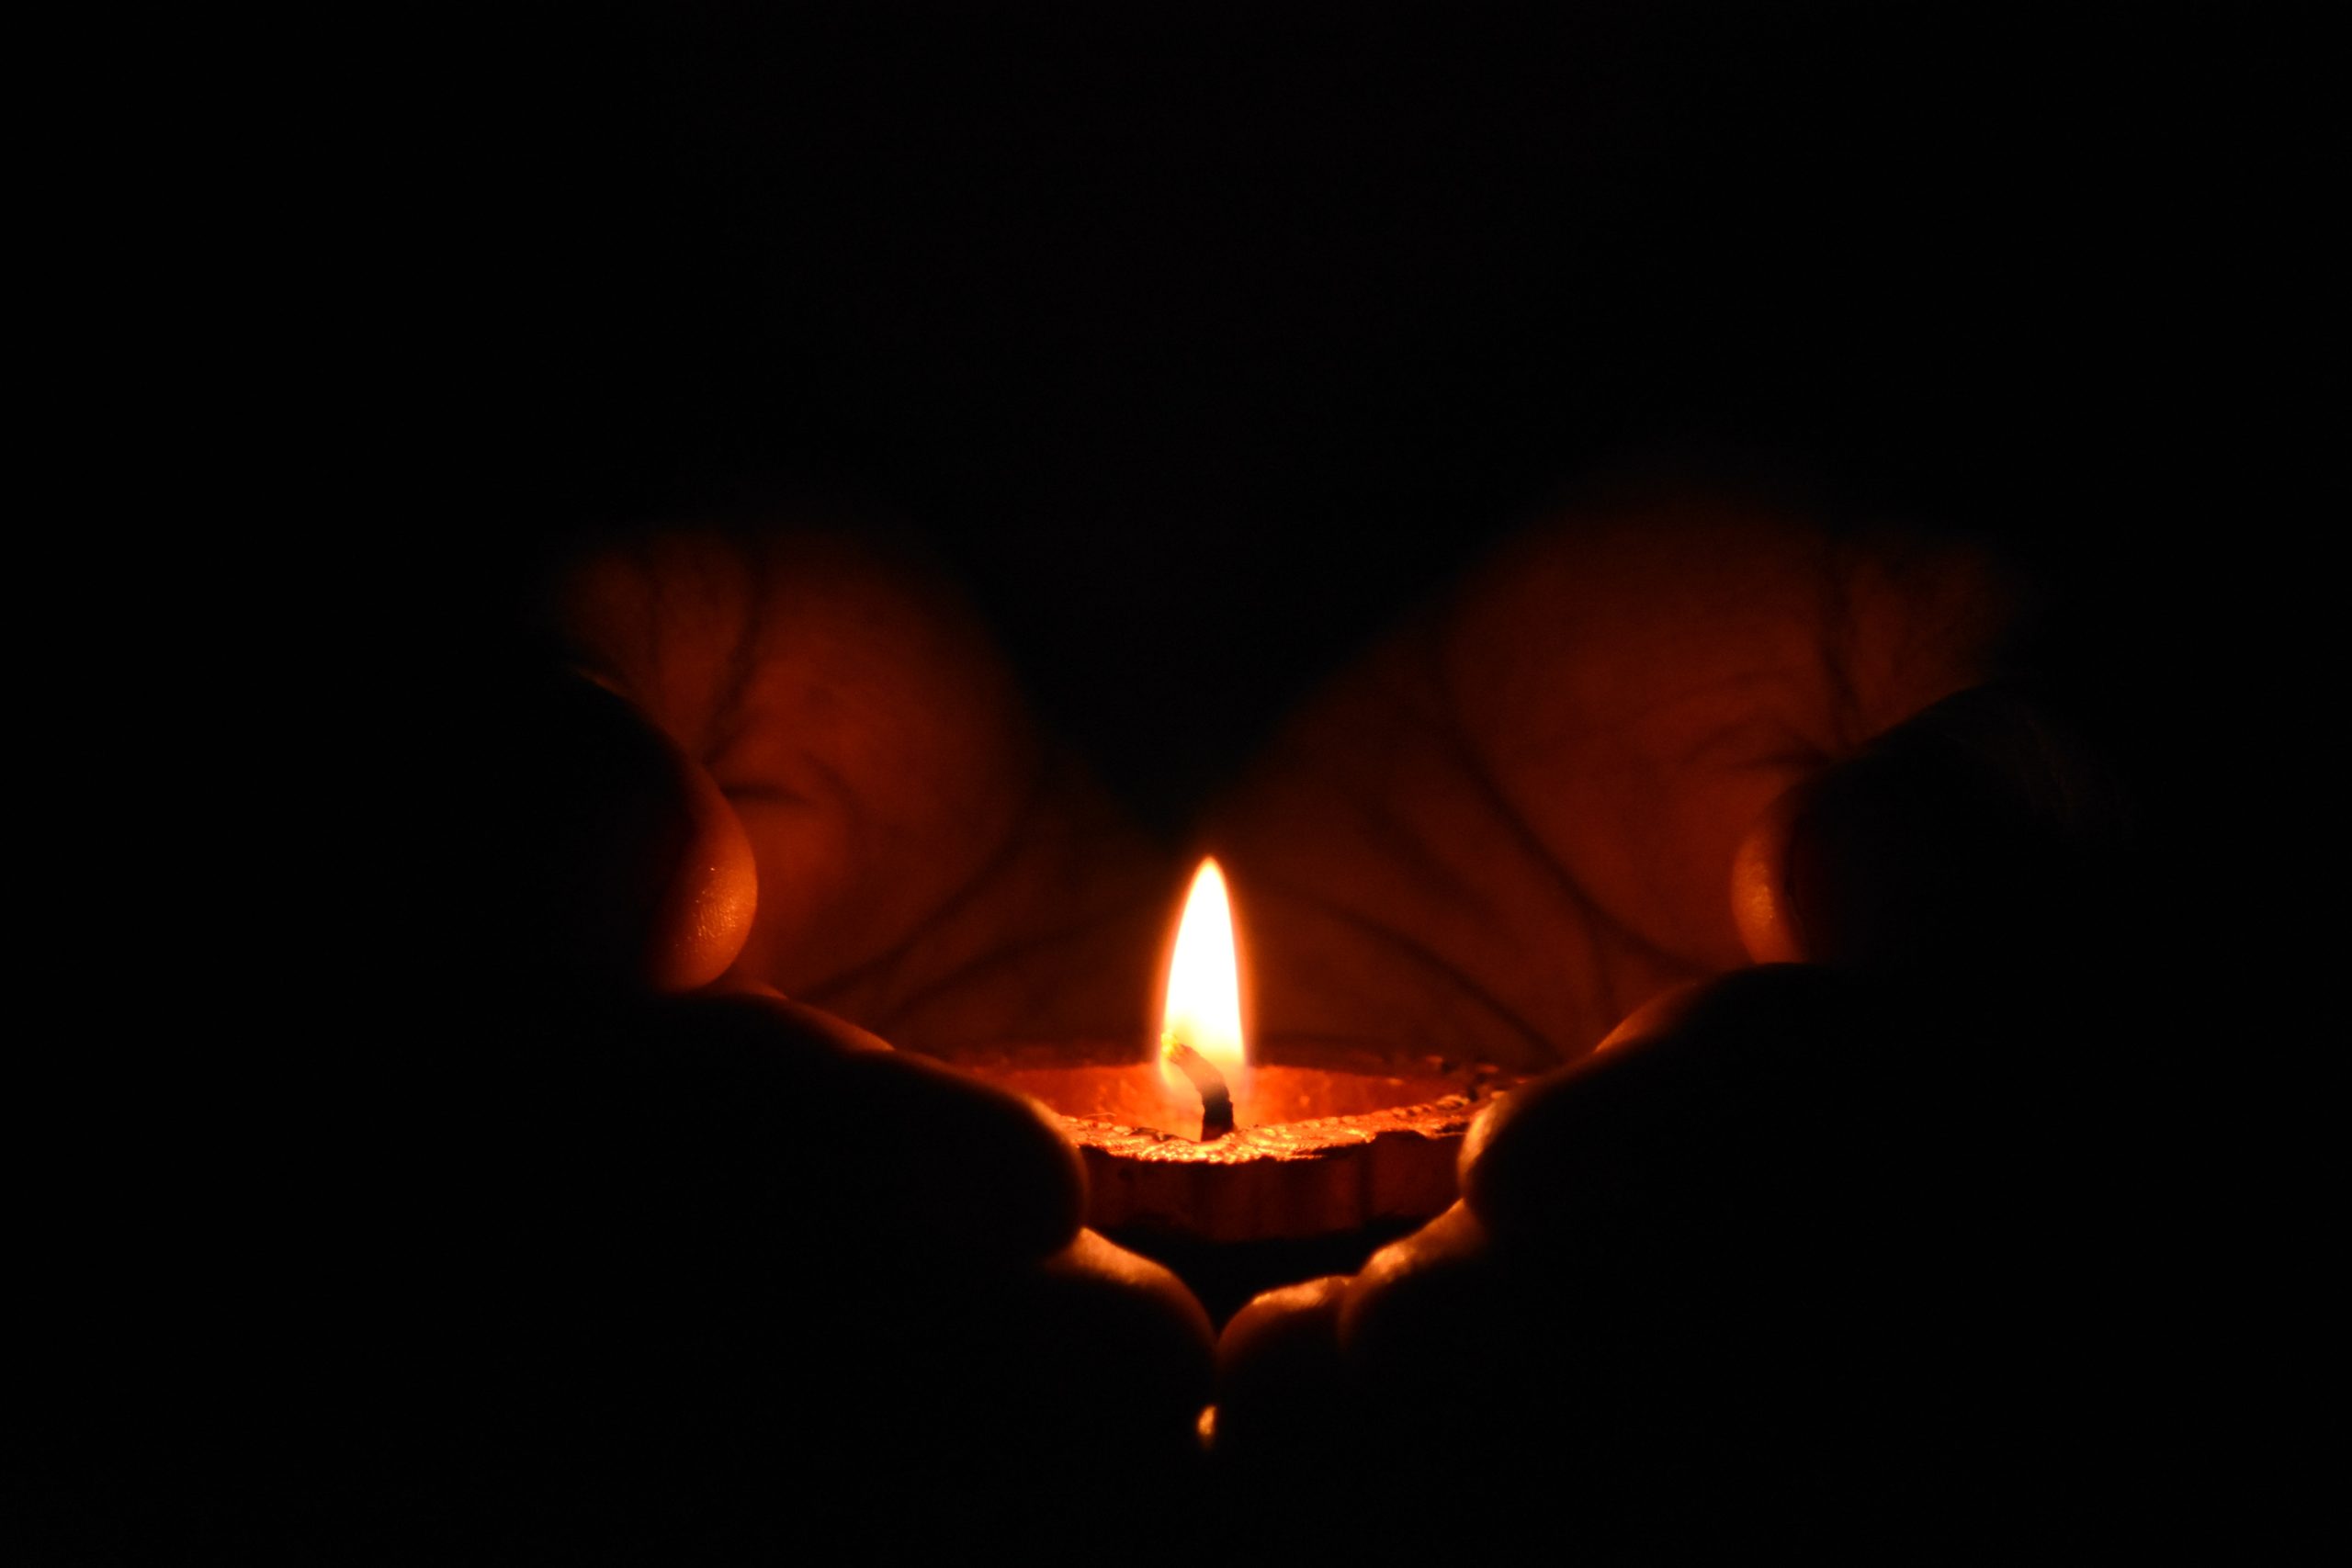 Two hands holding a small candle in the dark